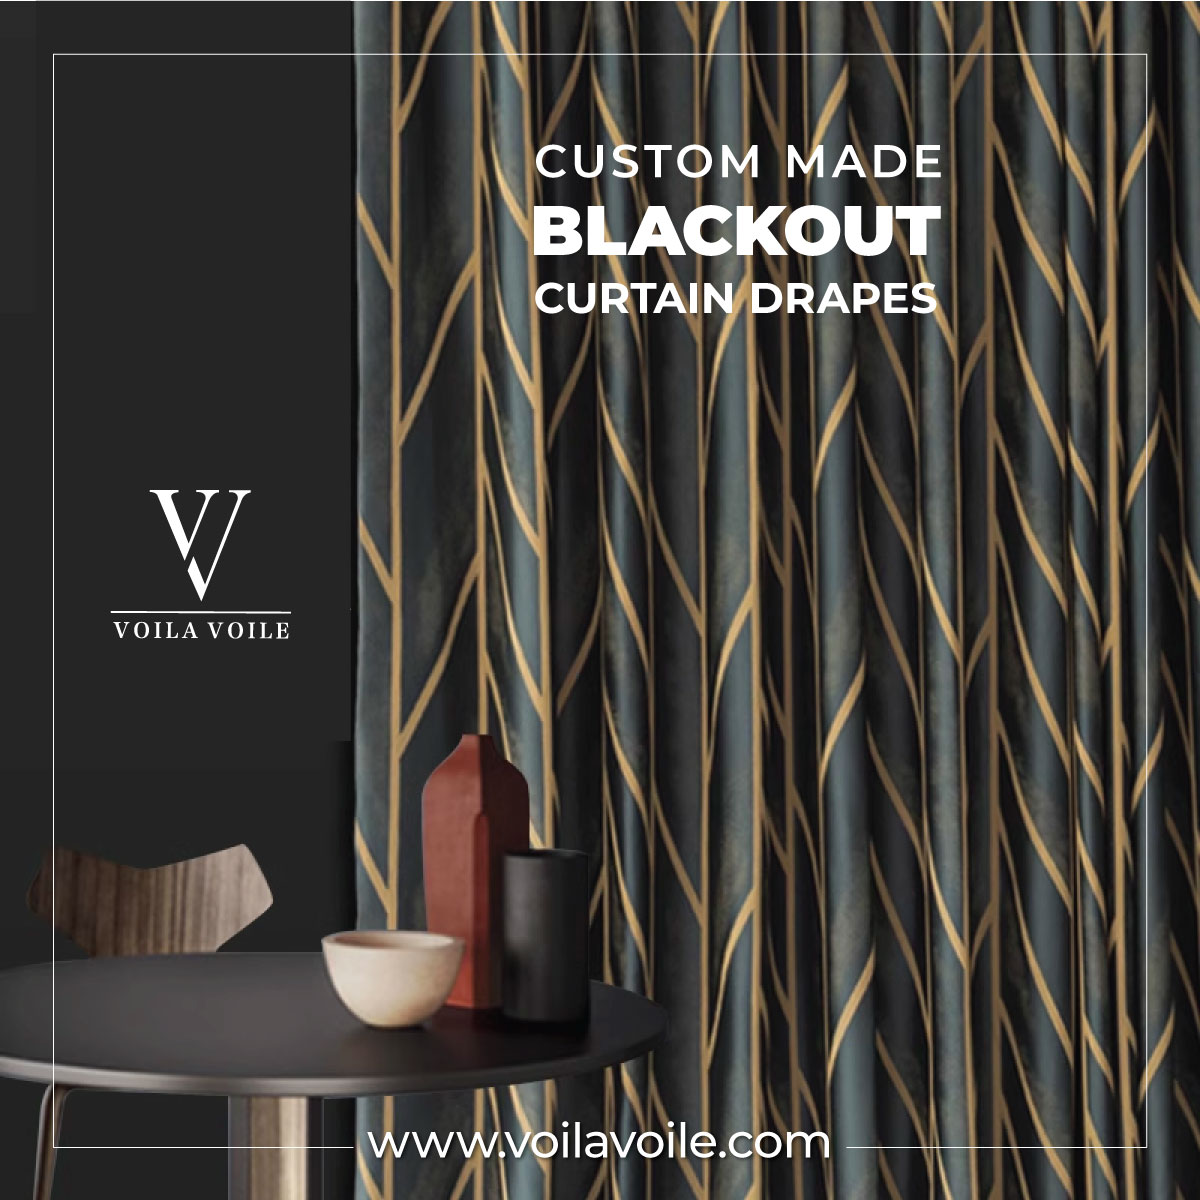 The World of Dreams: Transform Your Space with Custom Blackout Curtains